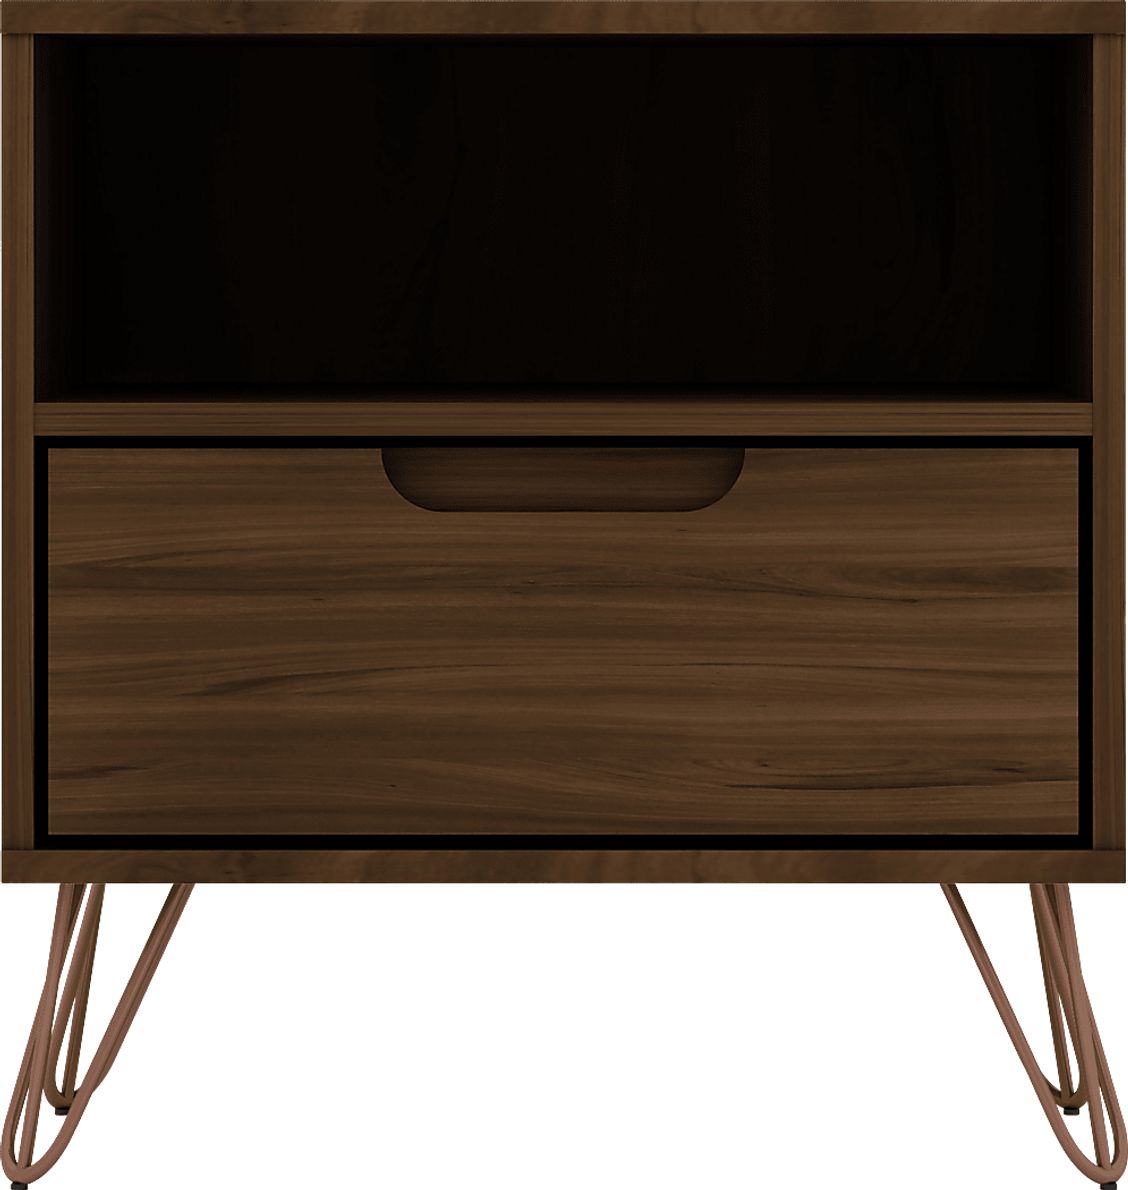 Camomile IV Brown Nightstand